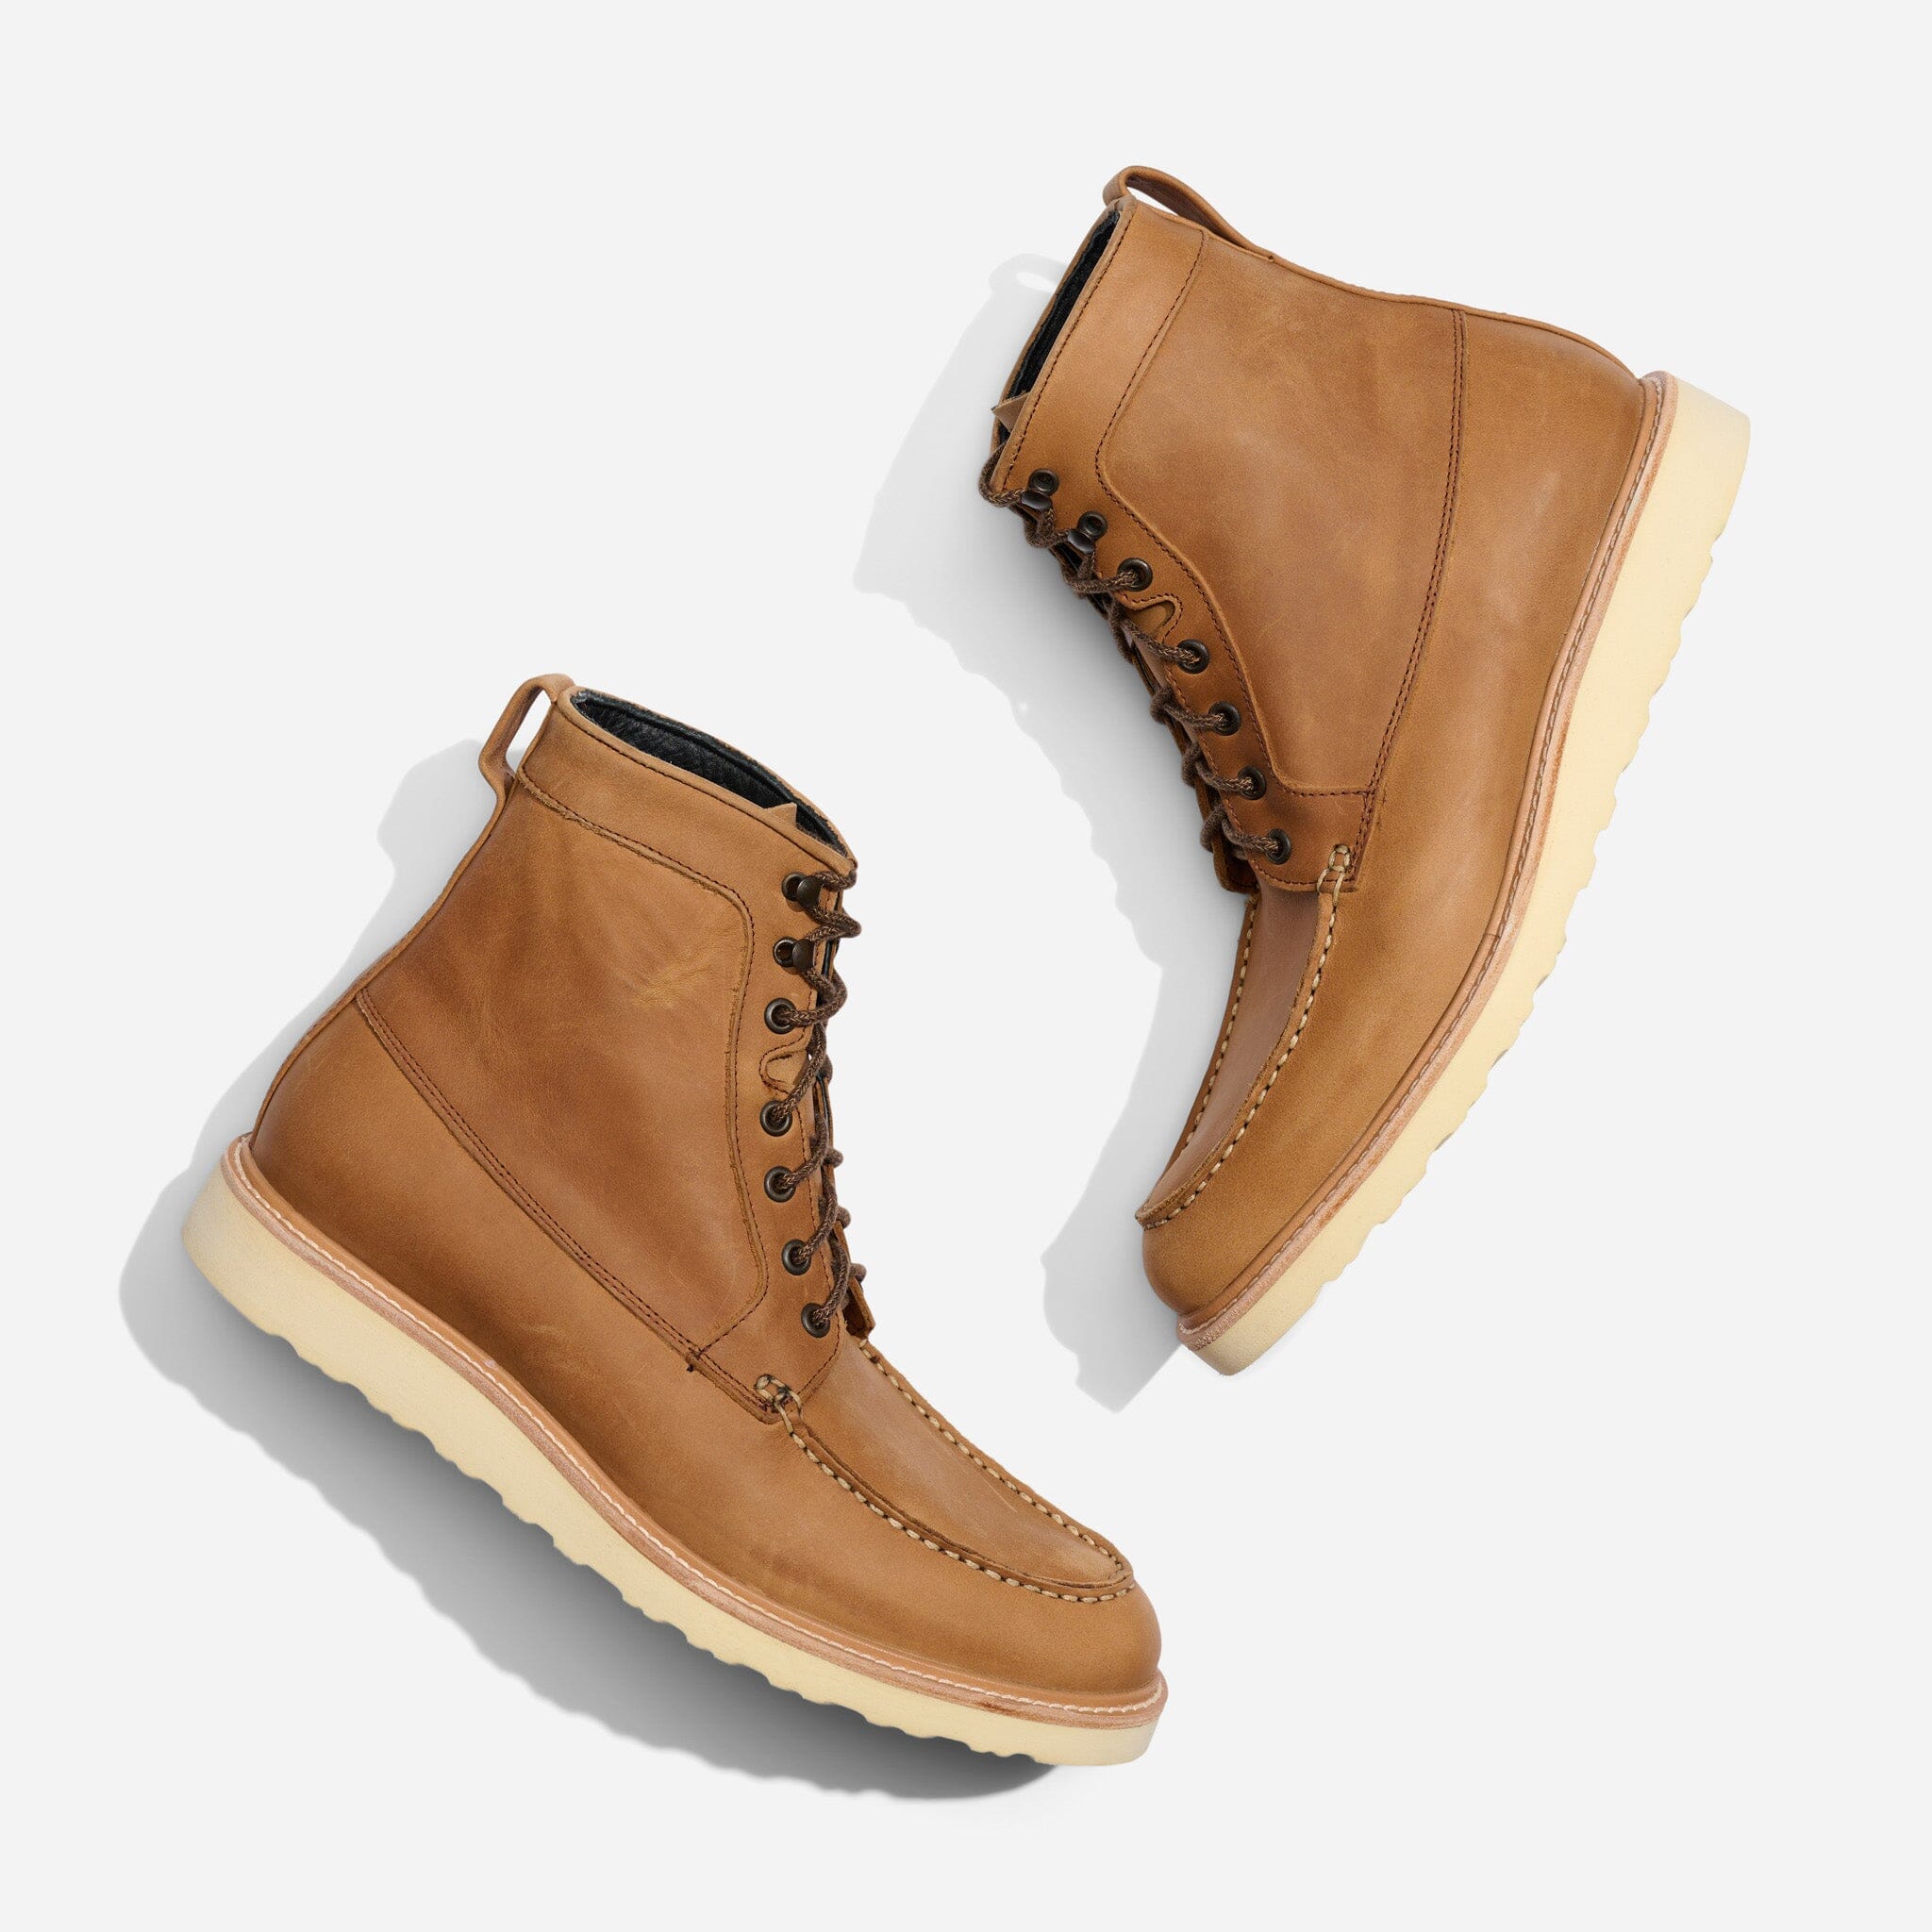 All-Weather Tobacco Boot Mateo